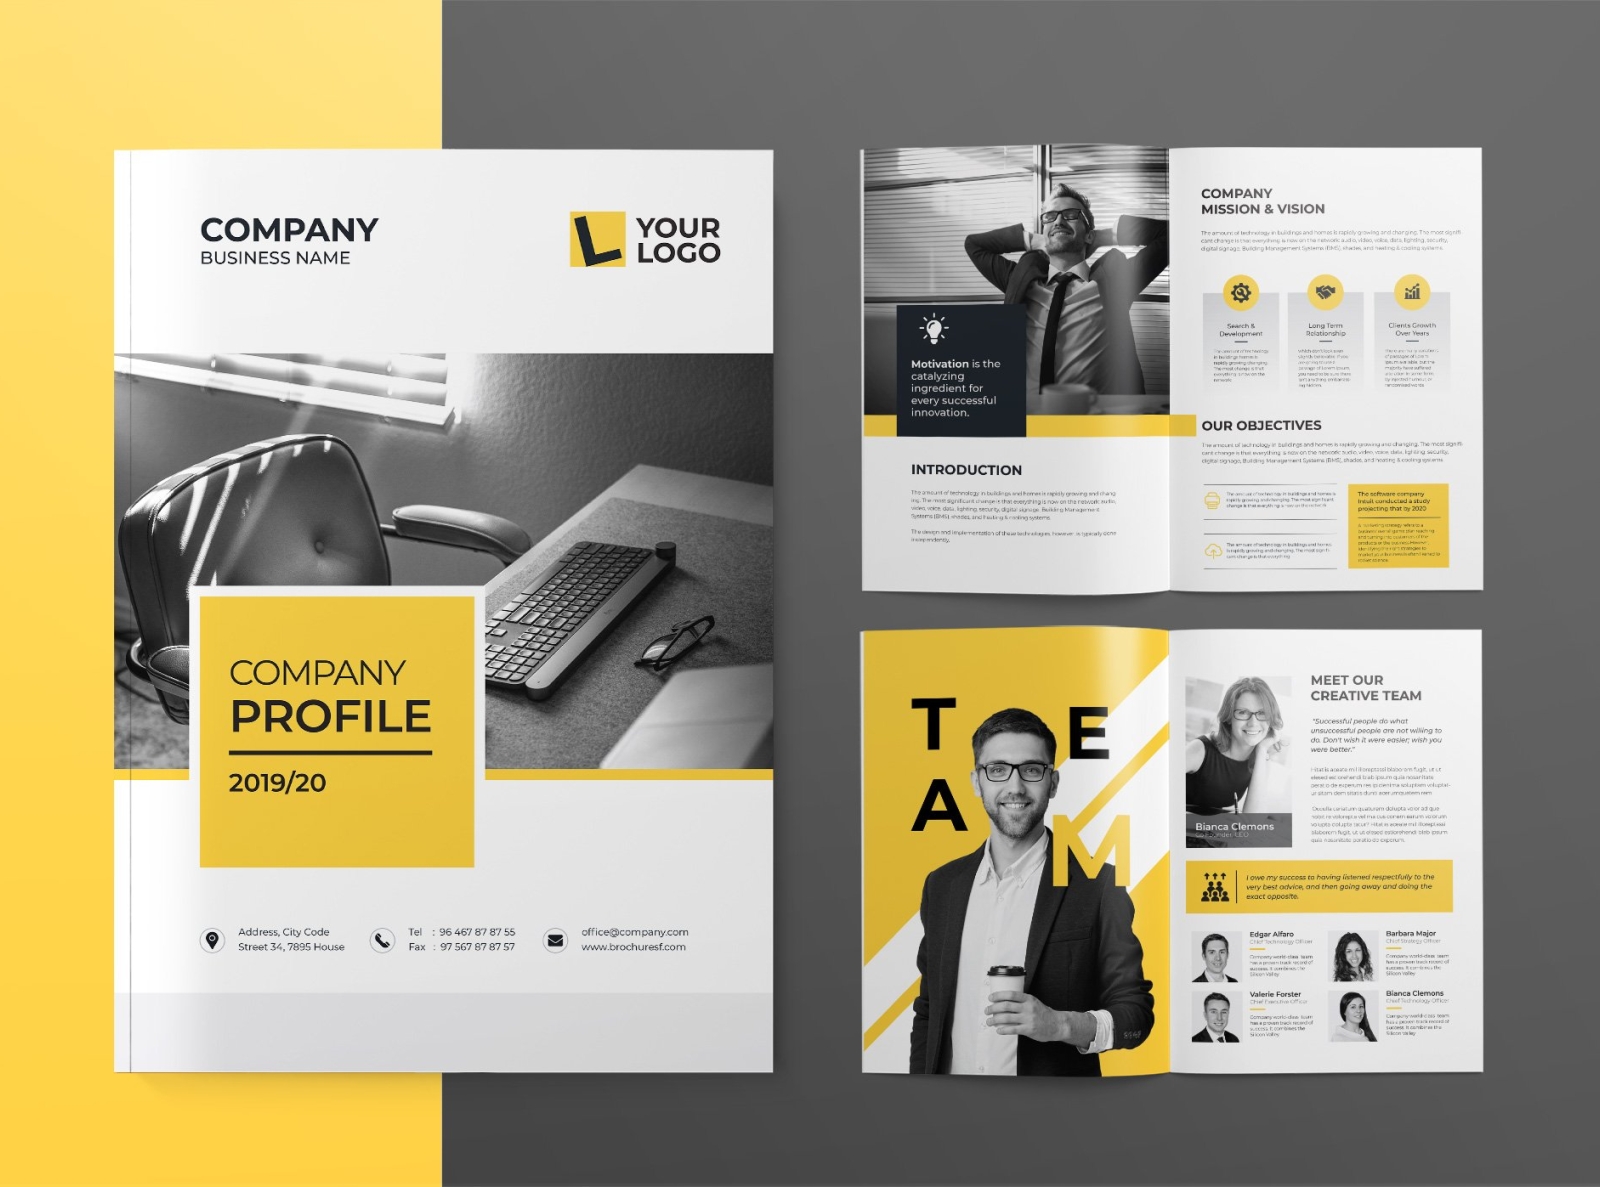 company-profile-word-template-by-brochure-design-on-dribbble